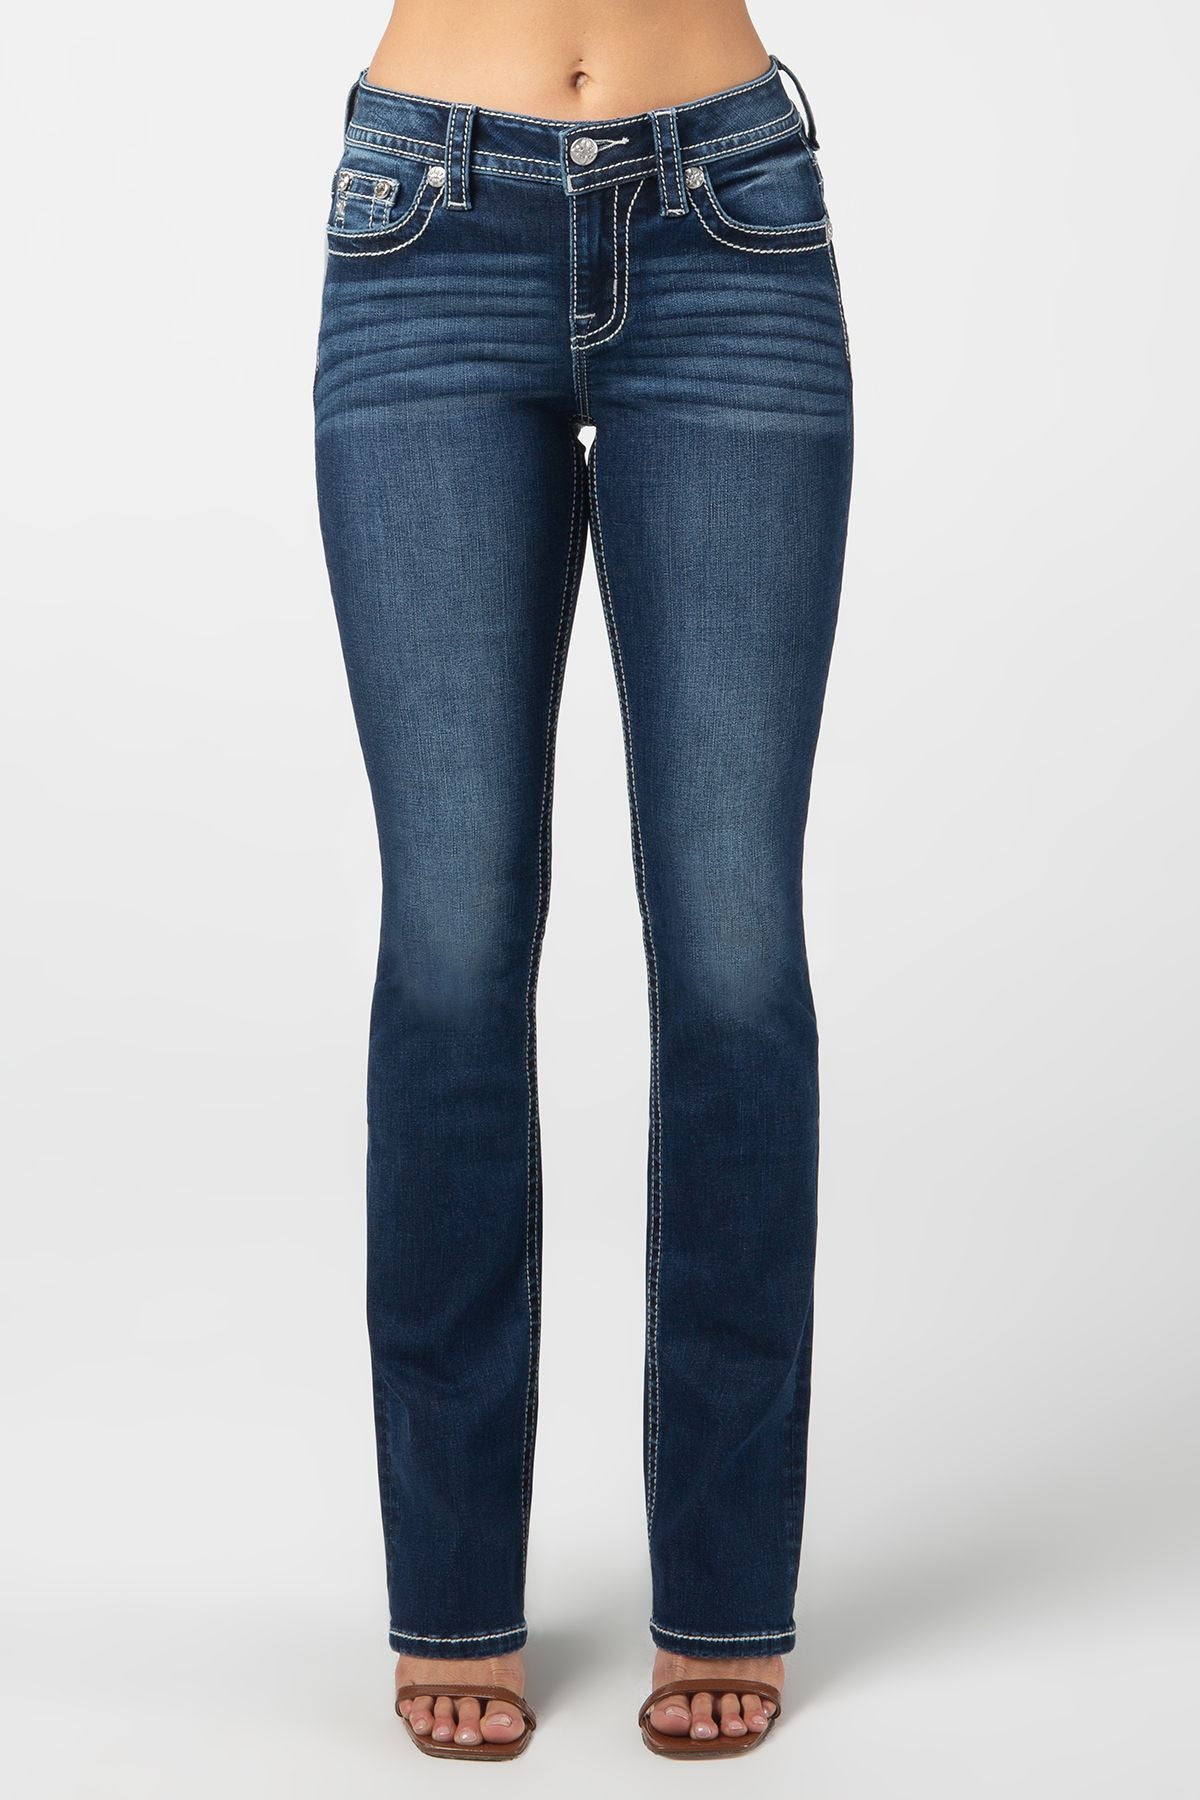 *Outlet* Miss Me Snowflake Bootcut Jeans